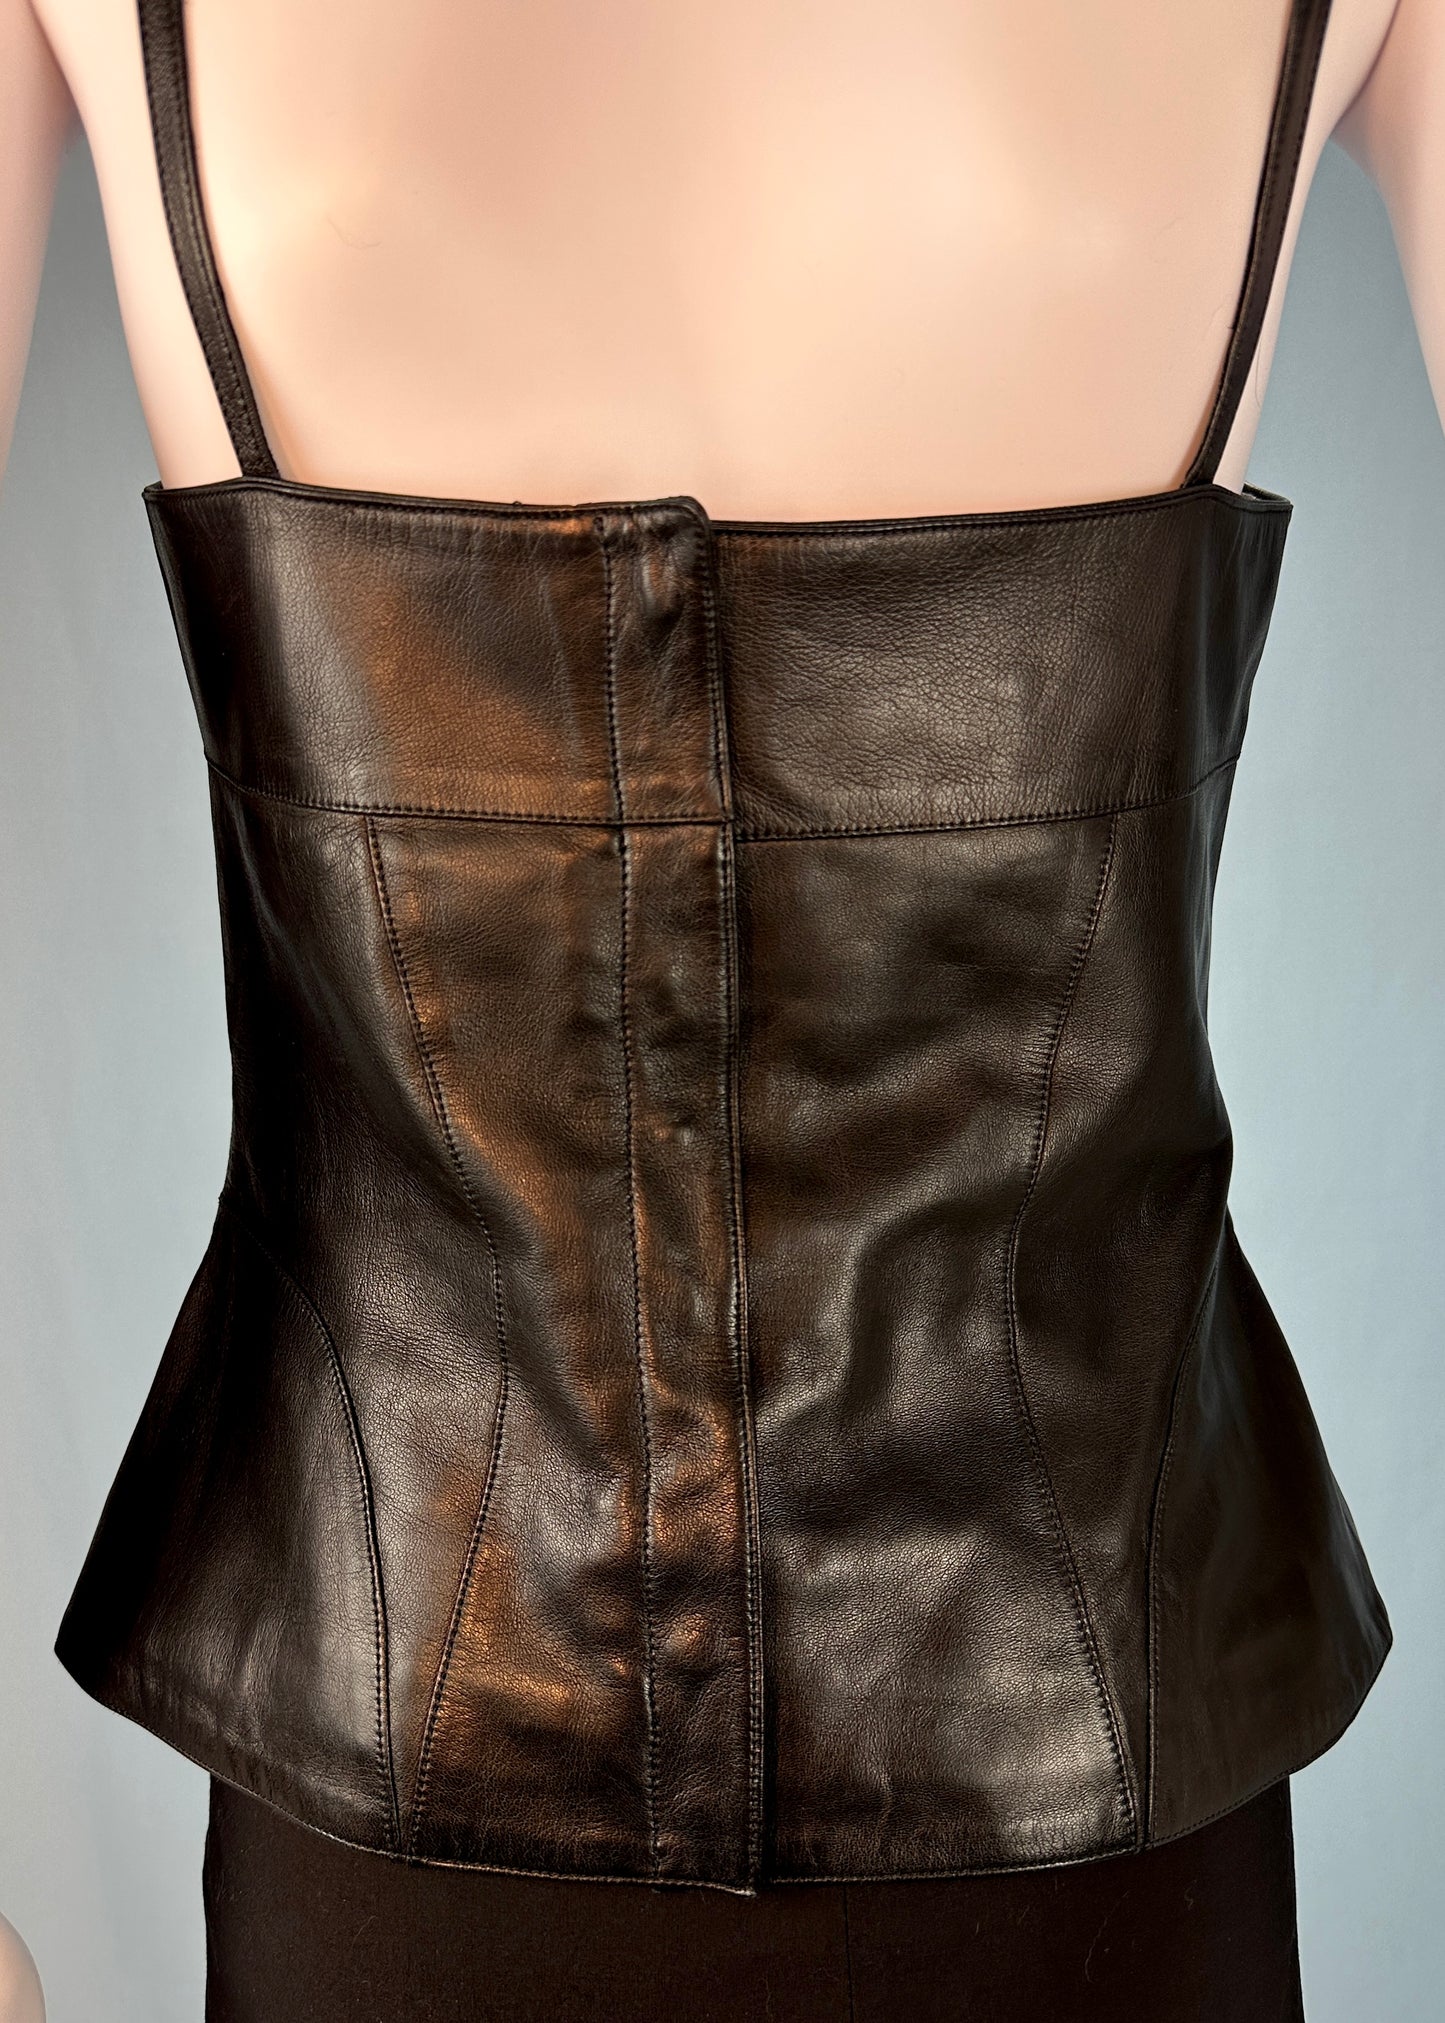 Thierry Mugler 1999 Black Leather Top